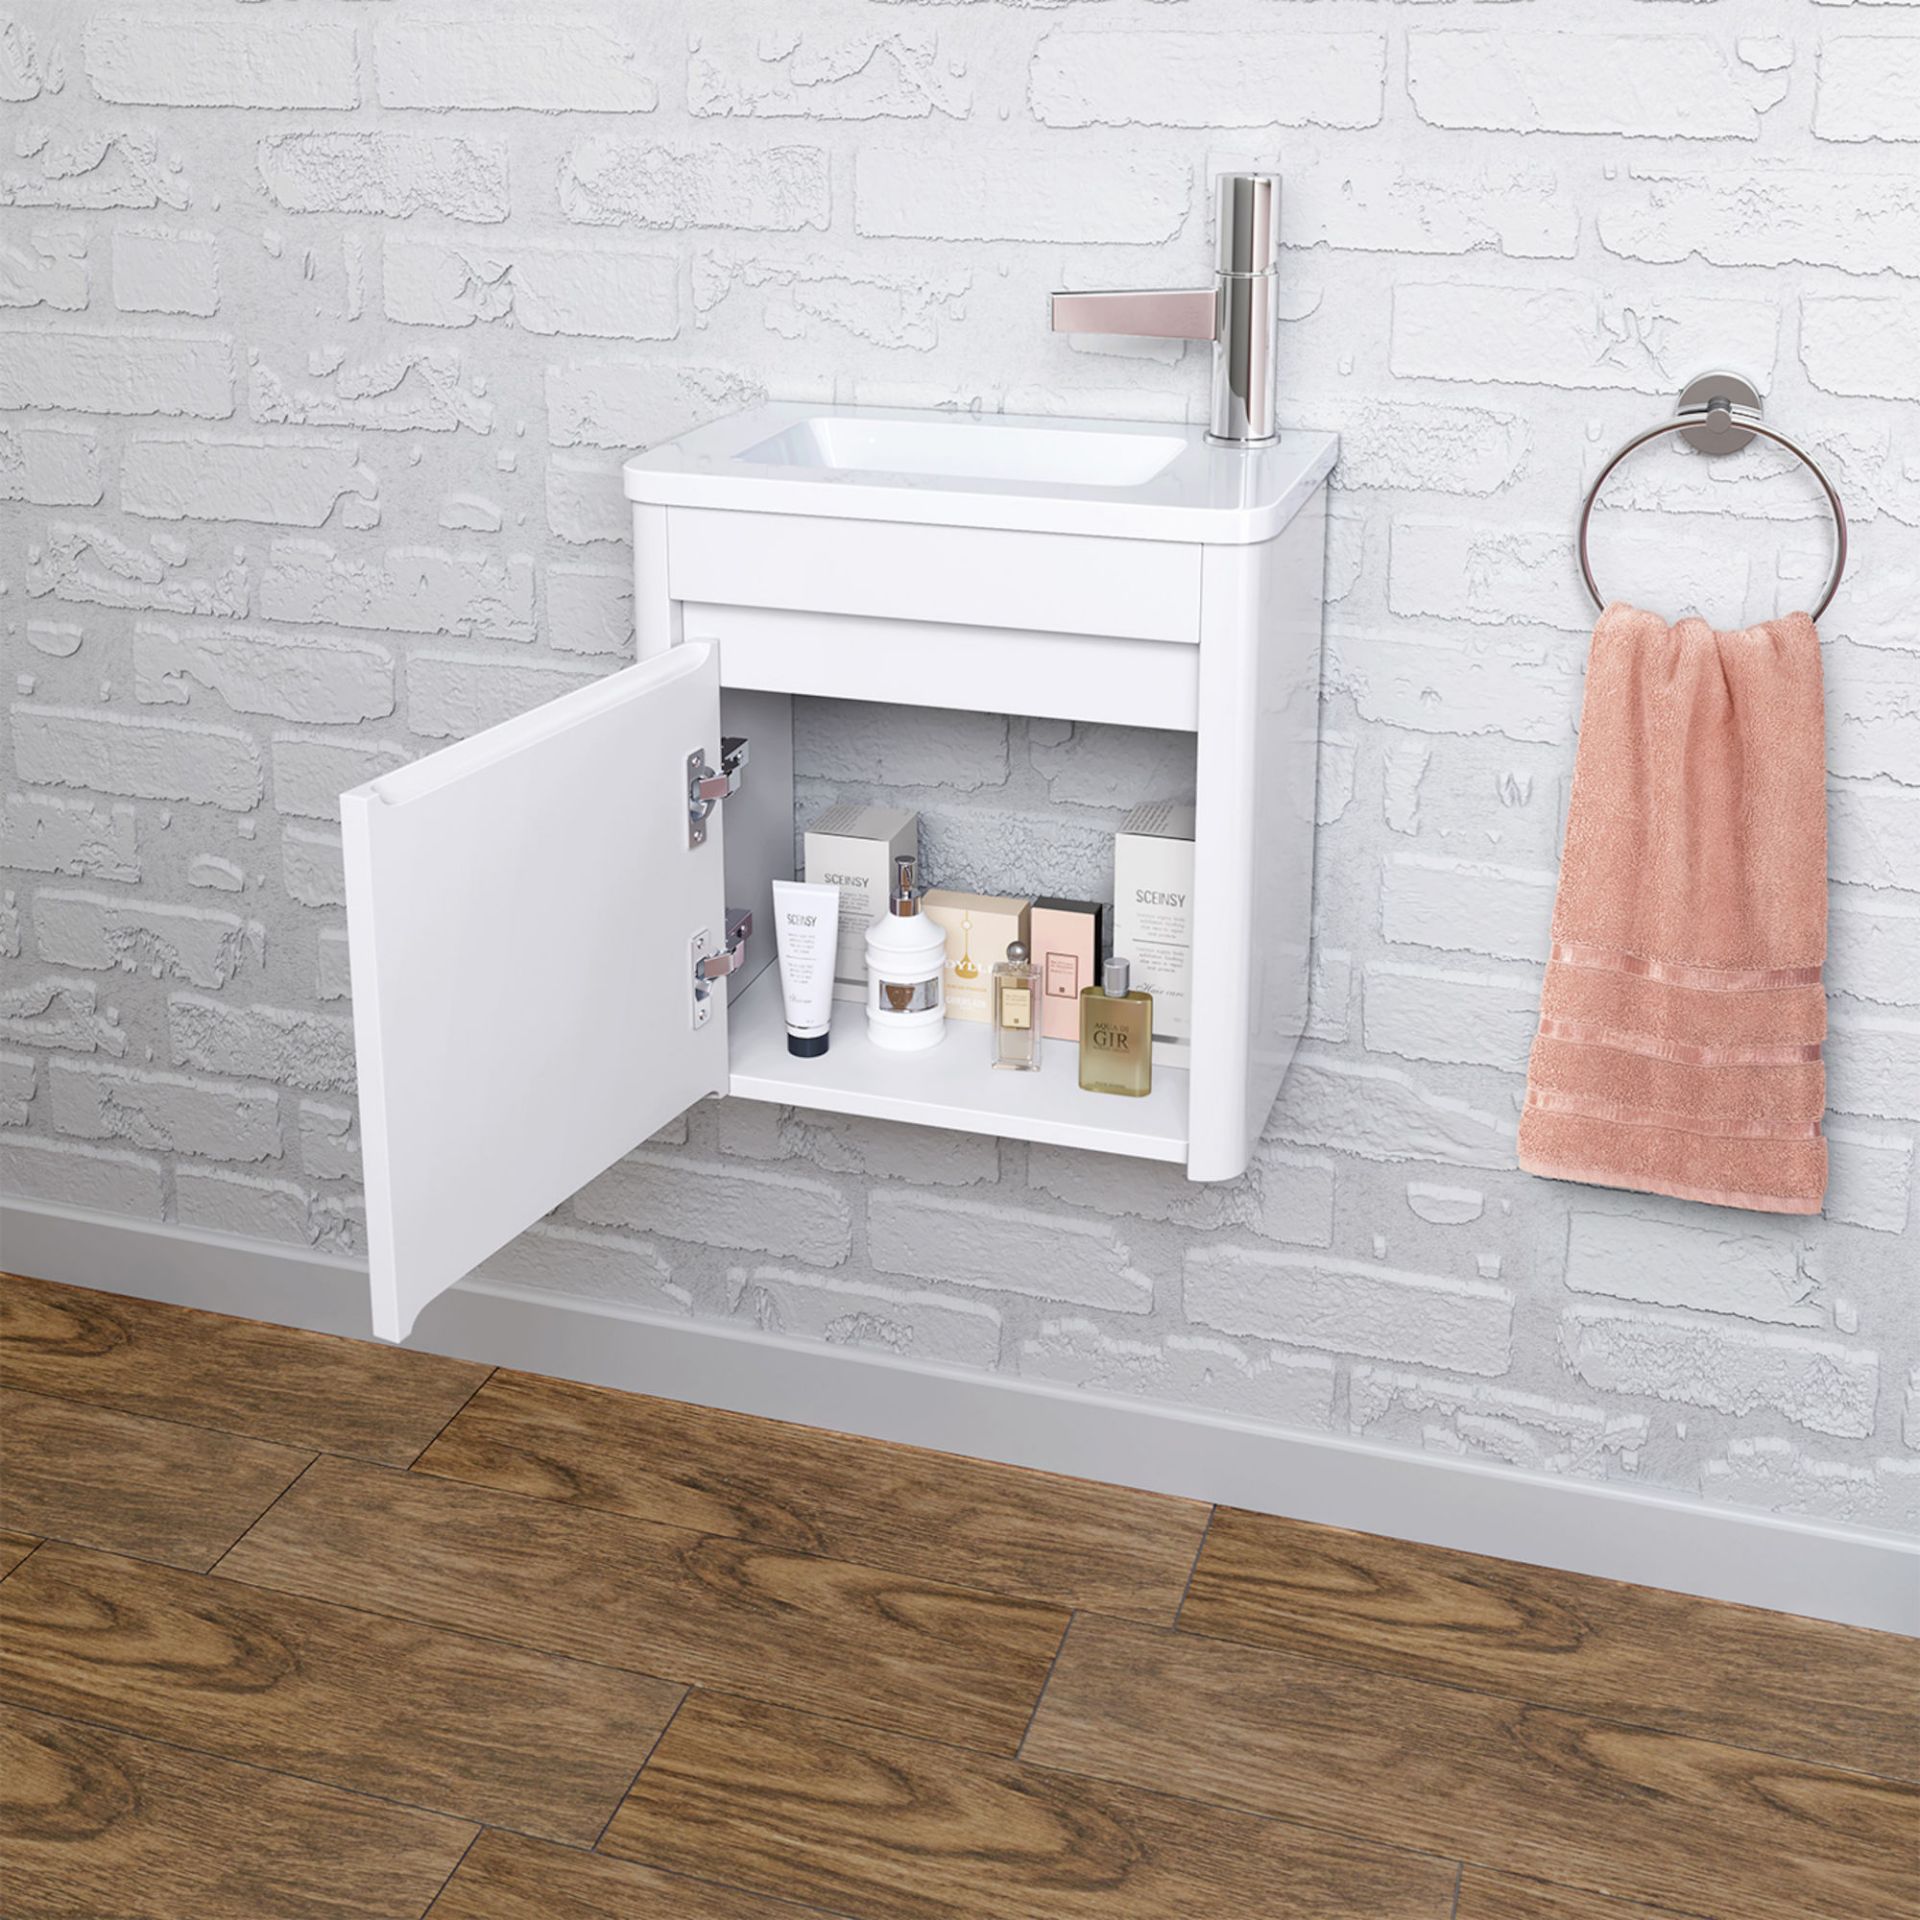 (OS43) 400mm Denver White Right Hand Cloakroom Vanity Unit - Wall Hung. RRP £399.99. Comes - Image 2 of 4